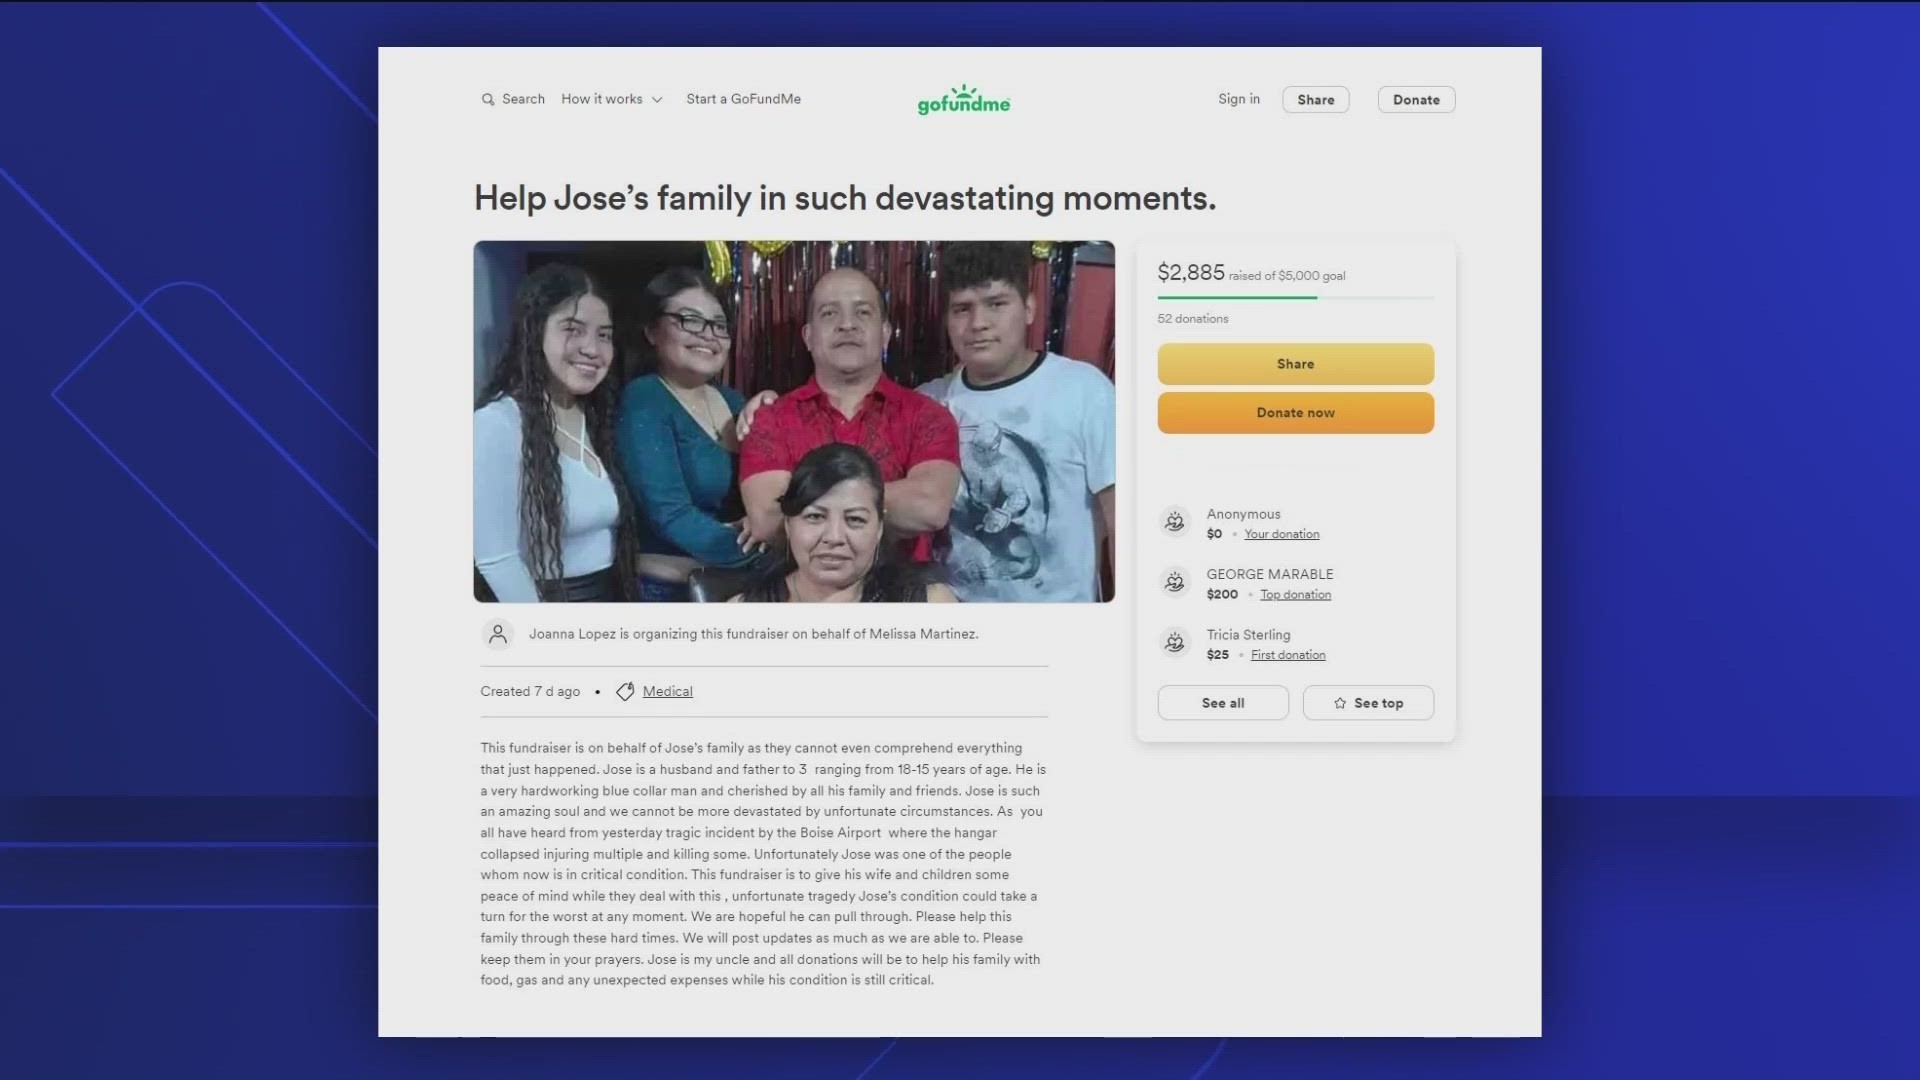 A GoFundMe was created to help support Jose's family with "food, gas and any unexpected expenses."